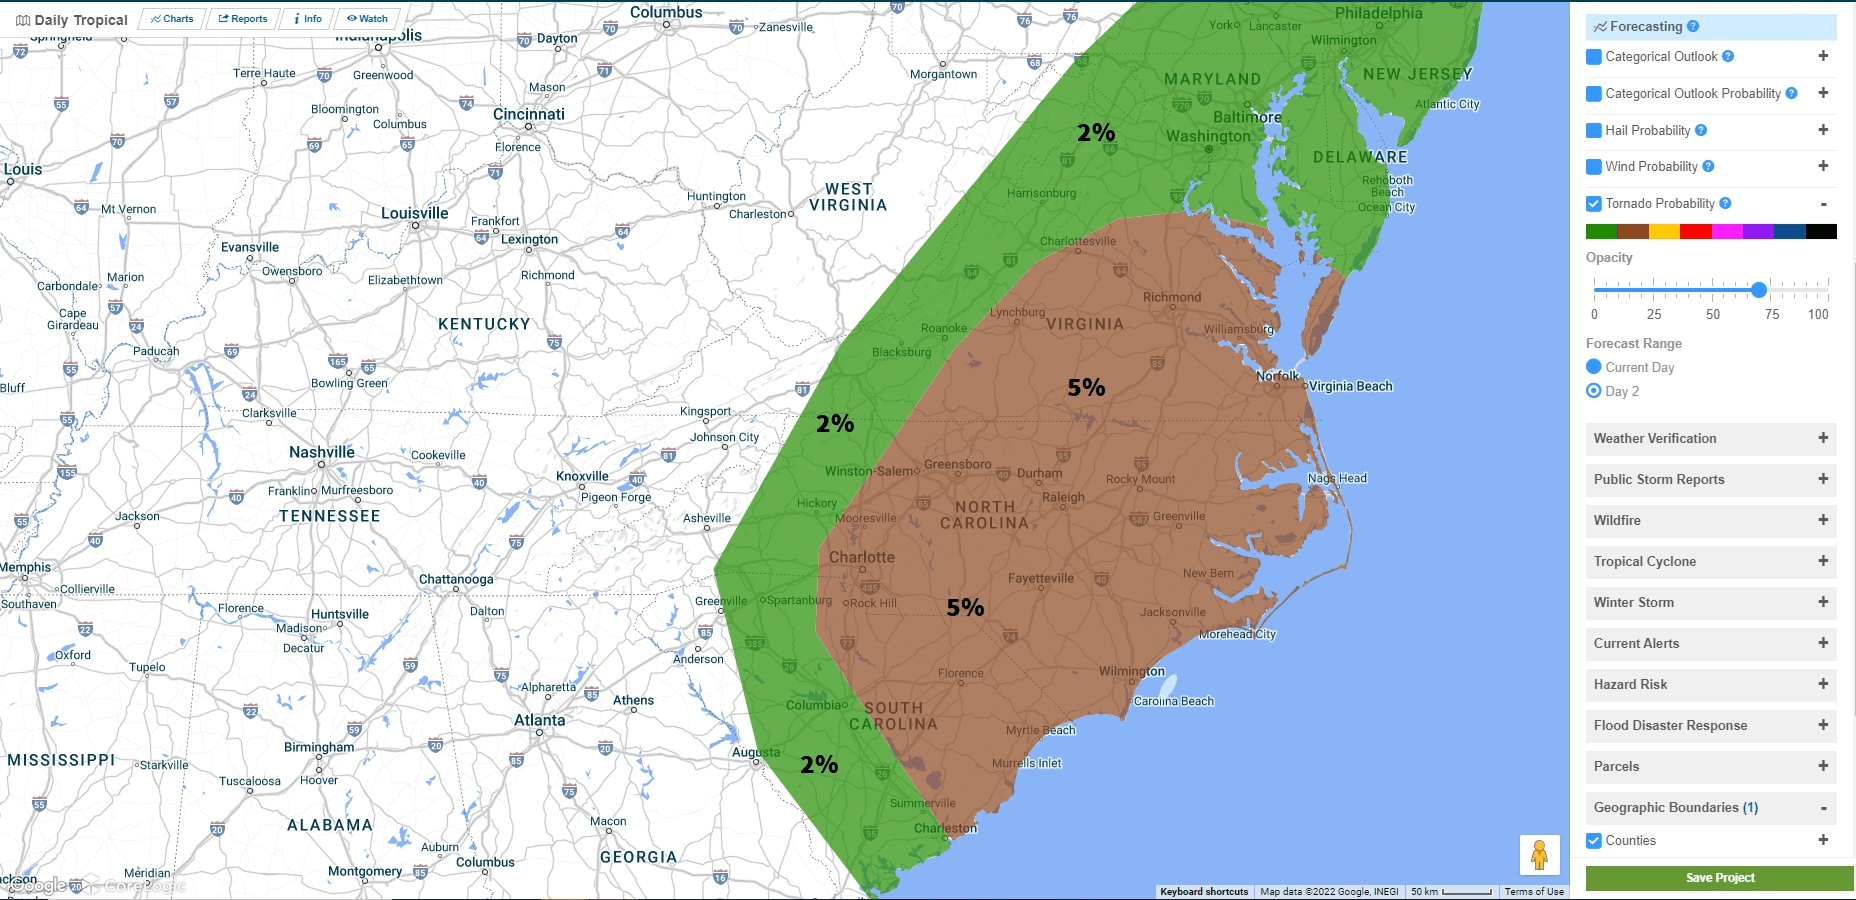 Figure 2: Tornado forecast for November 11. Percent chance of a tornado within 25 miles of any location